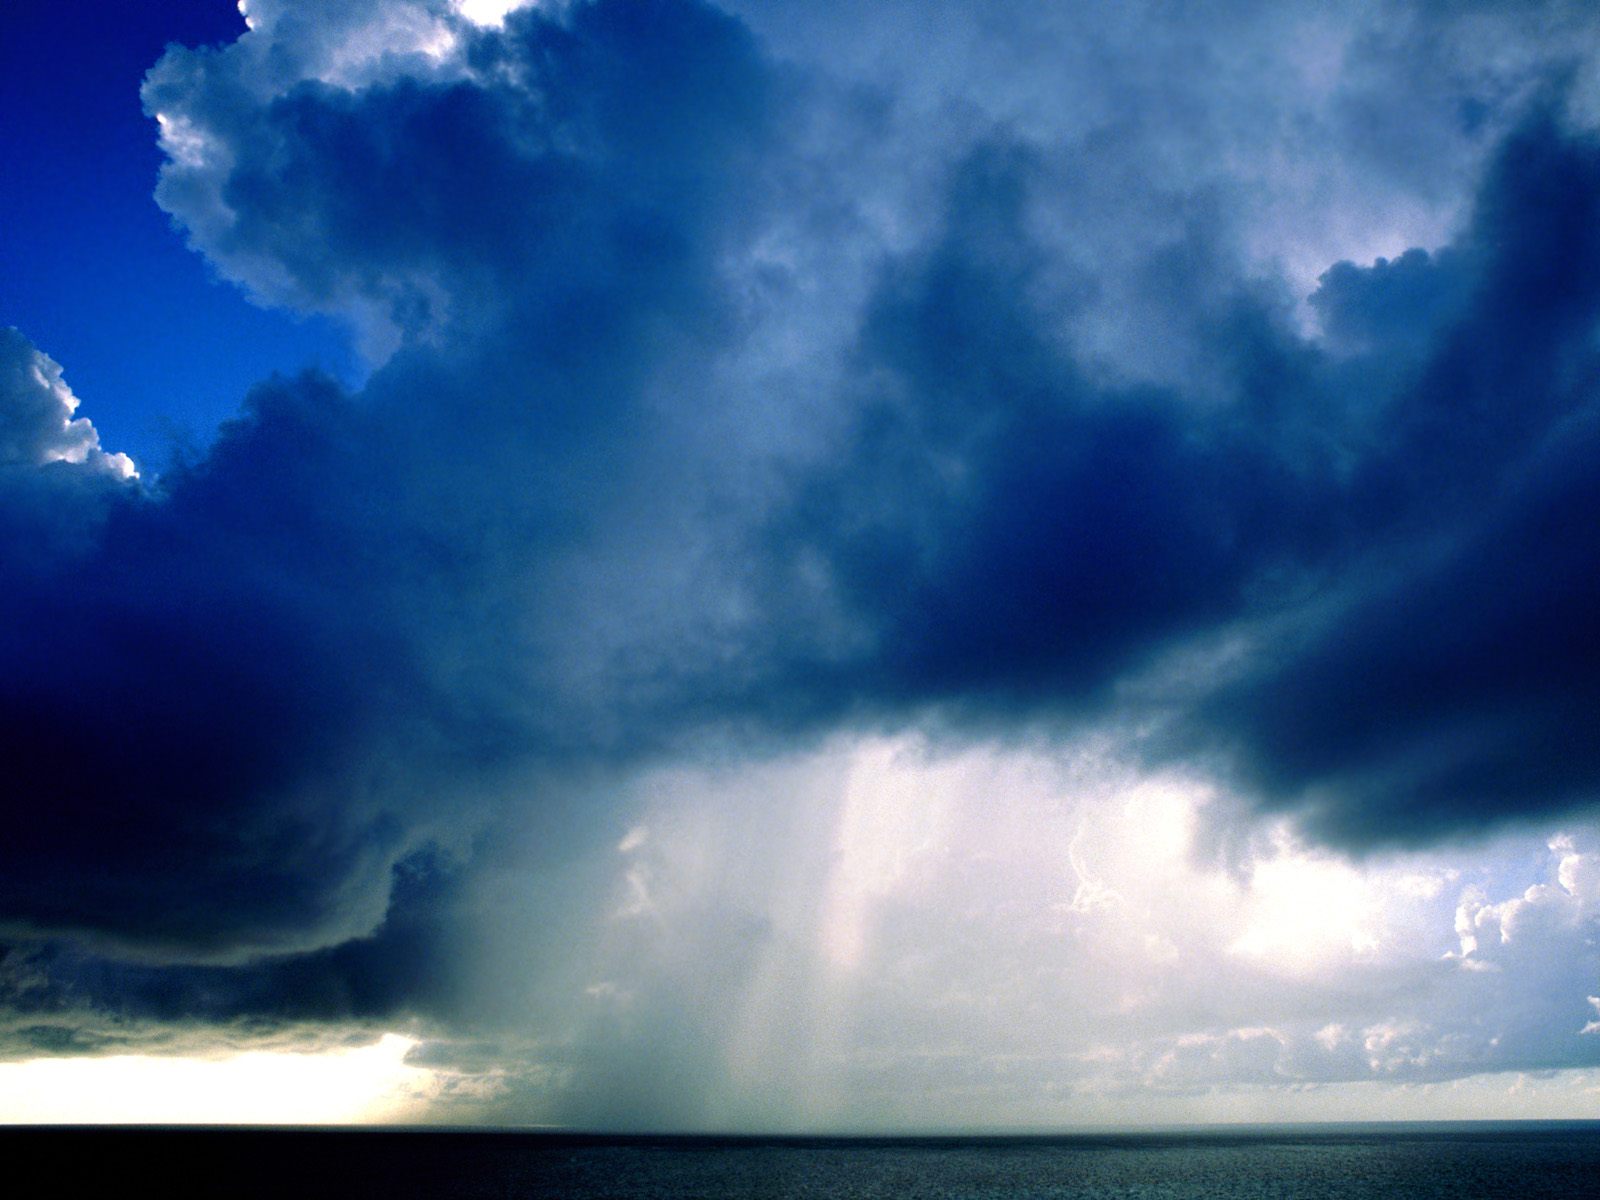 Download full size Cloudburst Forces of Nature wallpaper / 1600x1200